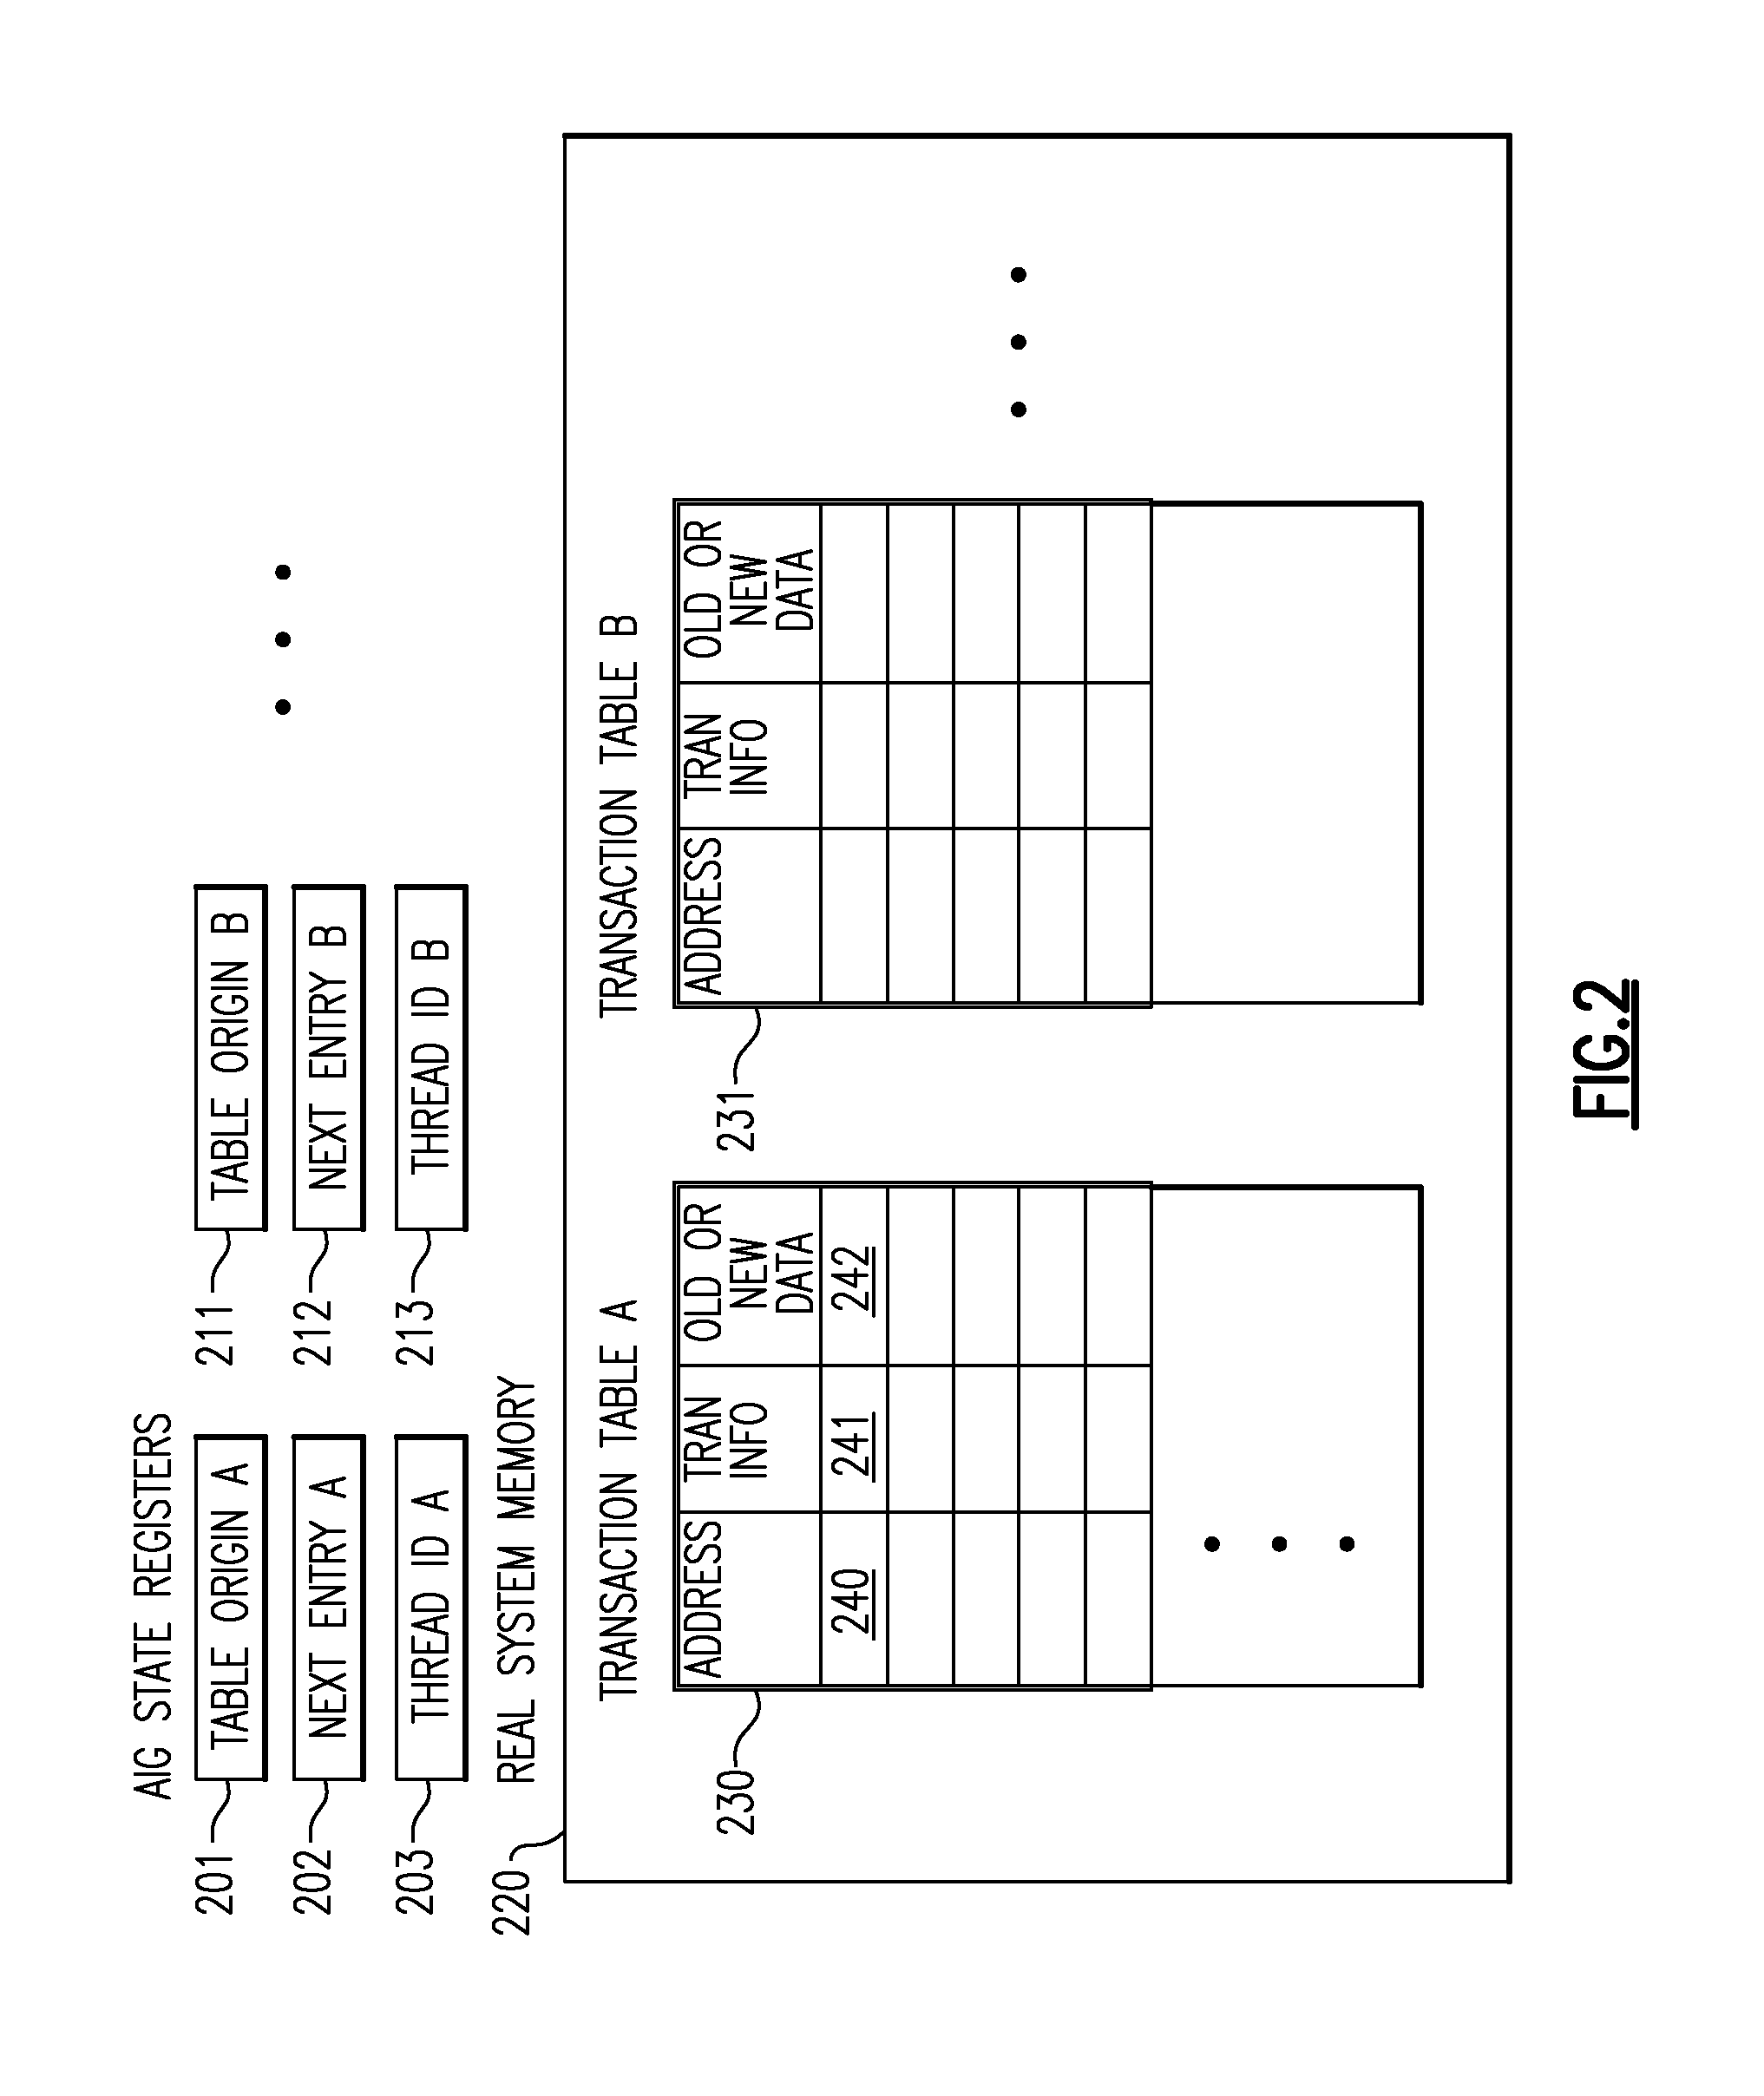 Computing System with Transactional Memory Using Millicode Assists